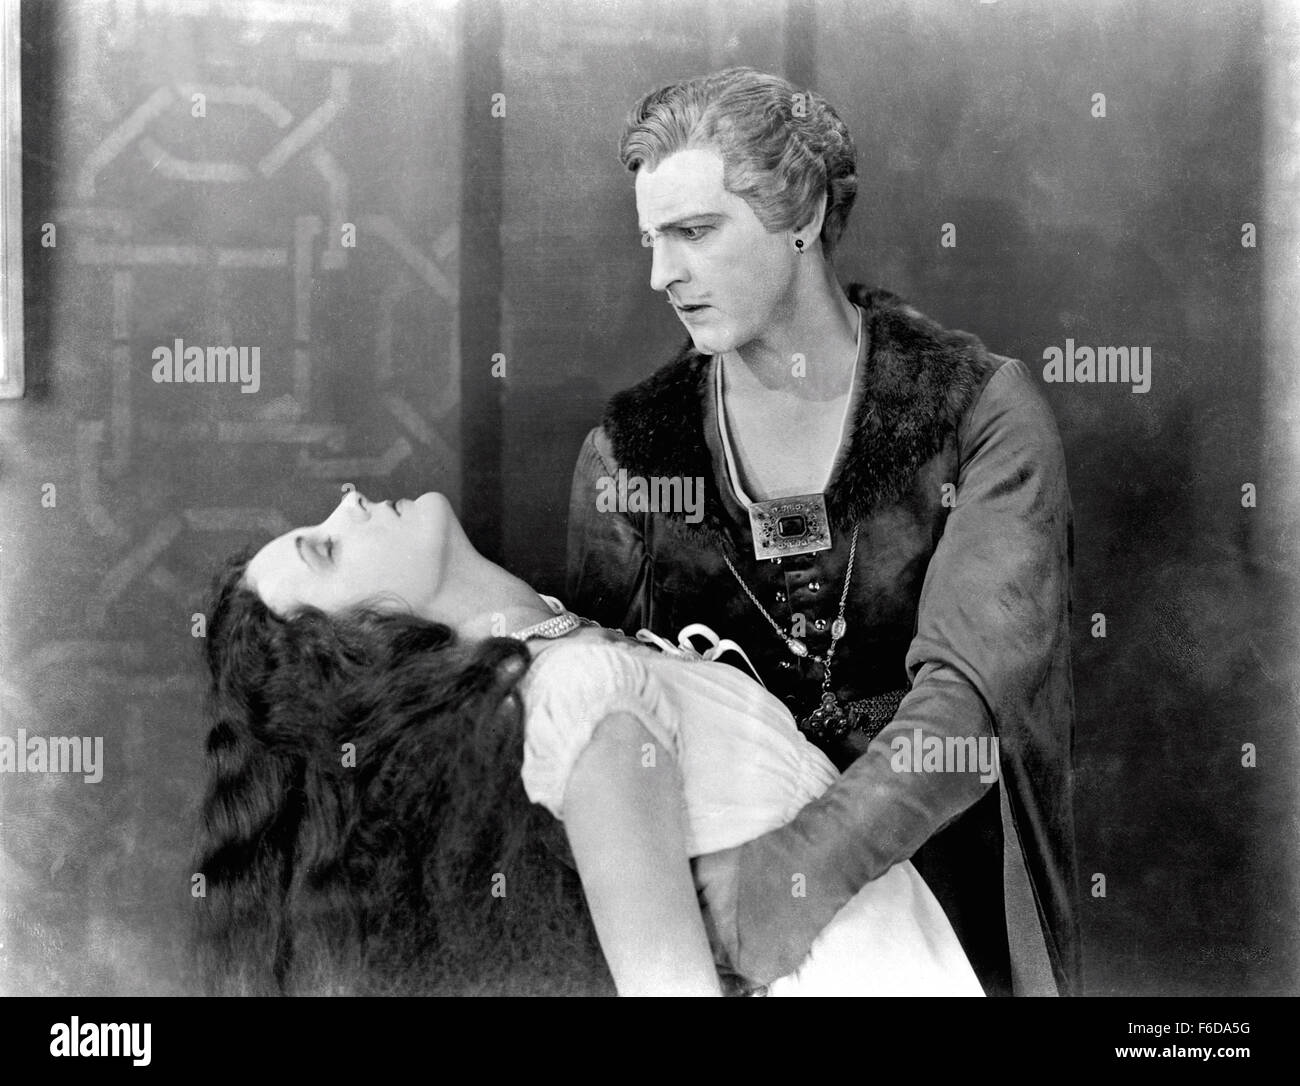 RELEASE DATE: February 19, 1927   MOVIE TITLE: Don Juan   STUDIO: Warner Bros. Pictures   DIRECTOR: Alan Crosland   PLOT: If there was one thing that Don Juan de Marana learned from his father Don Jose, it was that women gave you three things - life, disillusionment and death. In his father's case it was his wife, Donna Isobel, and Donna Elvira who supplied the latter. Don Juan settled in Rome after attending the University of Pisa. Rome was run by the tyrannical Borgia family consisting of Caesar, Lucrezia and the Count Donati. Juan has his way with and was pursued by many women, but it is th Stock Photo